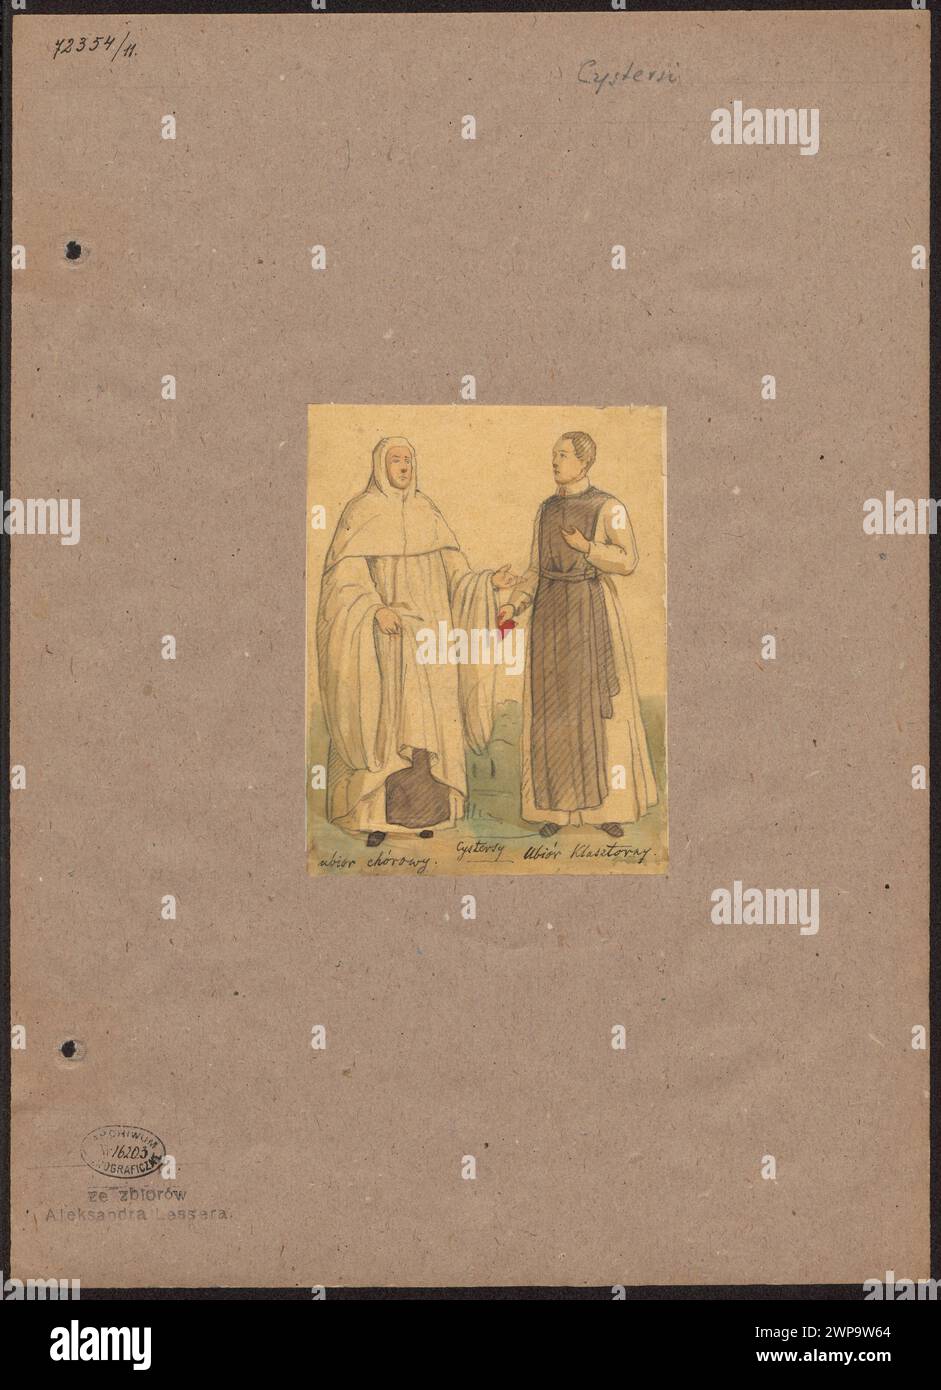 Two Cistercians - one in choral clothing, the other in the monastery; Lesser, Aleksander (1814-1884); 1830-1884 (1830-00-00-1884-00-00);Lesser, Aleksander (1814-1884), Lesser, Aleksander (1814-1884) - collections, Lesser, Emiljan Stanisław (Baron - 1847-1912) - collection, Lesser, Wiktor Stanisław Zygmunt (Baron - 1853-1935), Lesser, Wiktor, Wiktor Stanisław Zygmunt (Baron - 1853-1935) - collection, Cistercians (Order), gift (provenance), habits, monks, clothing, clergy outfits, religious Stock Photo